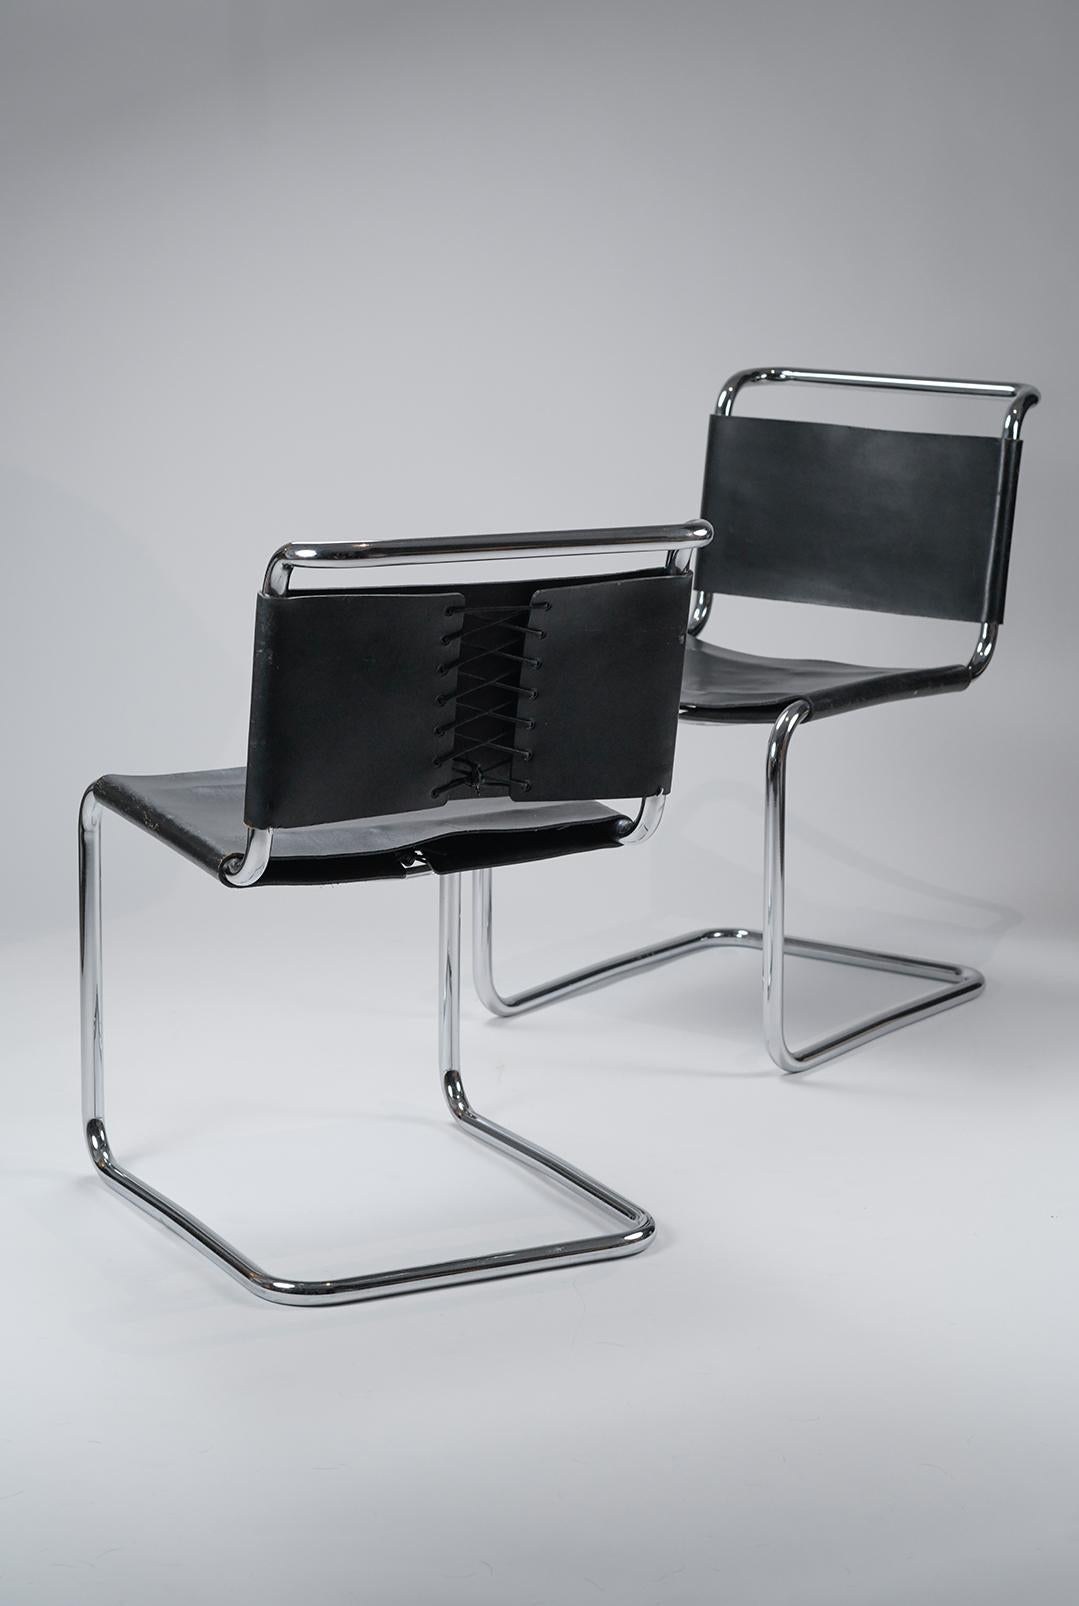 Designed in 1927 by Marcel Breuer, these iconic B33 chairs produced by Knoll feature a cantilevered tubular steel frame and leather 